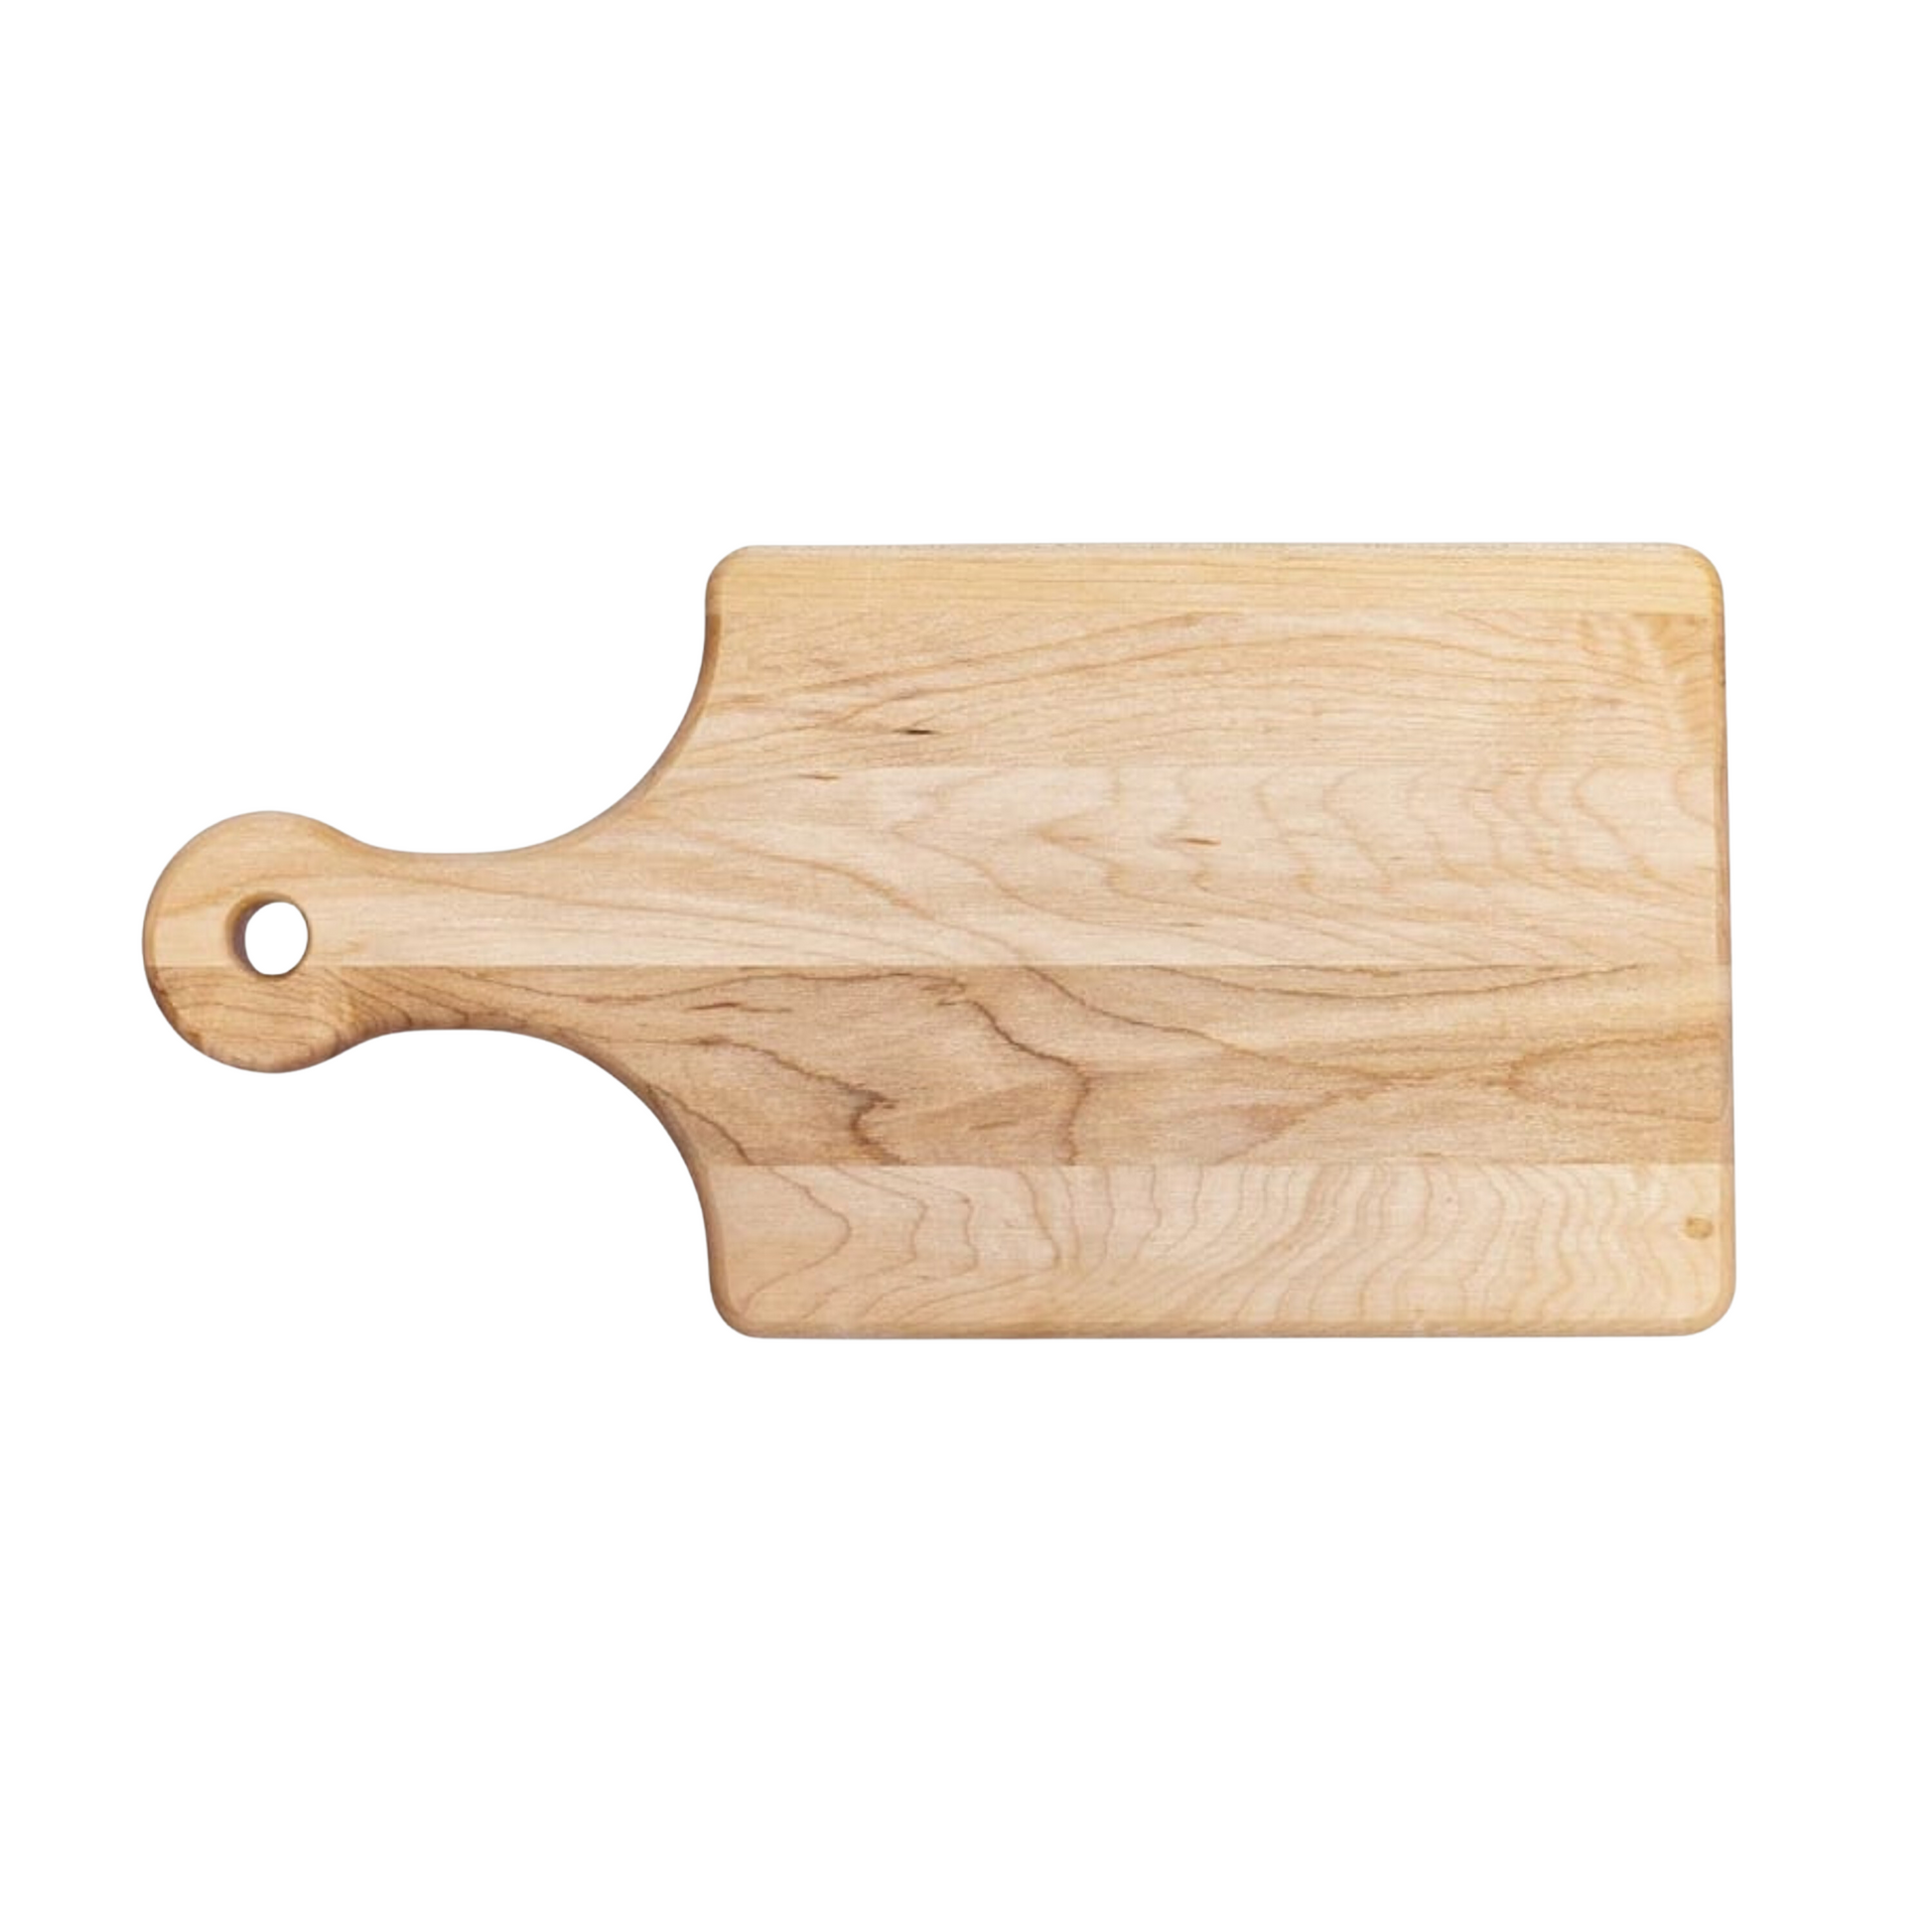 Choose To Be Grateful Cutting Board - Premium Cutting Boards from Hipster Lasers - Just $40! Shop now at Hipster Lasers